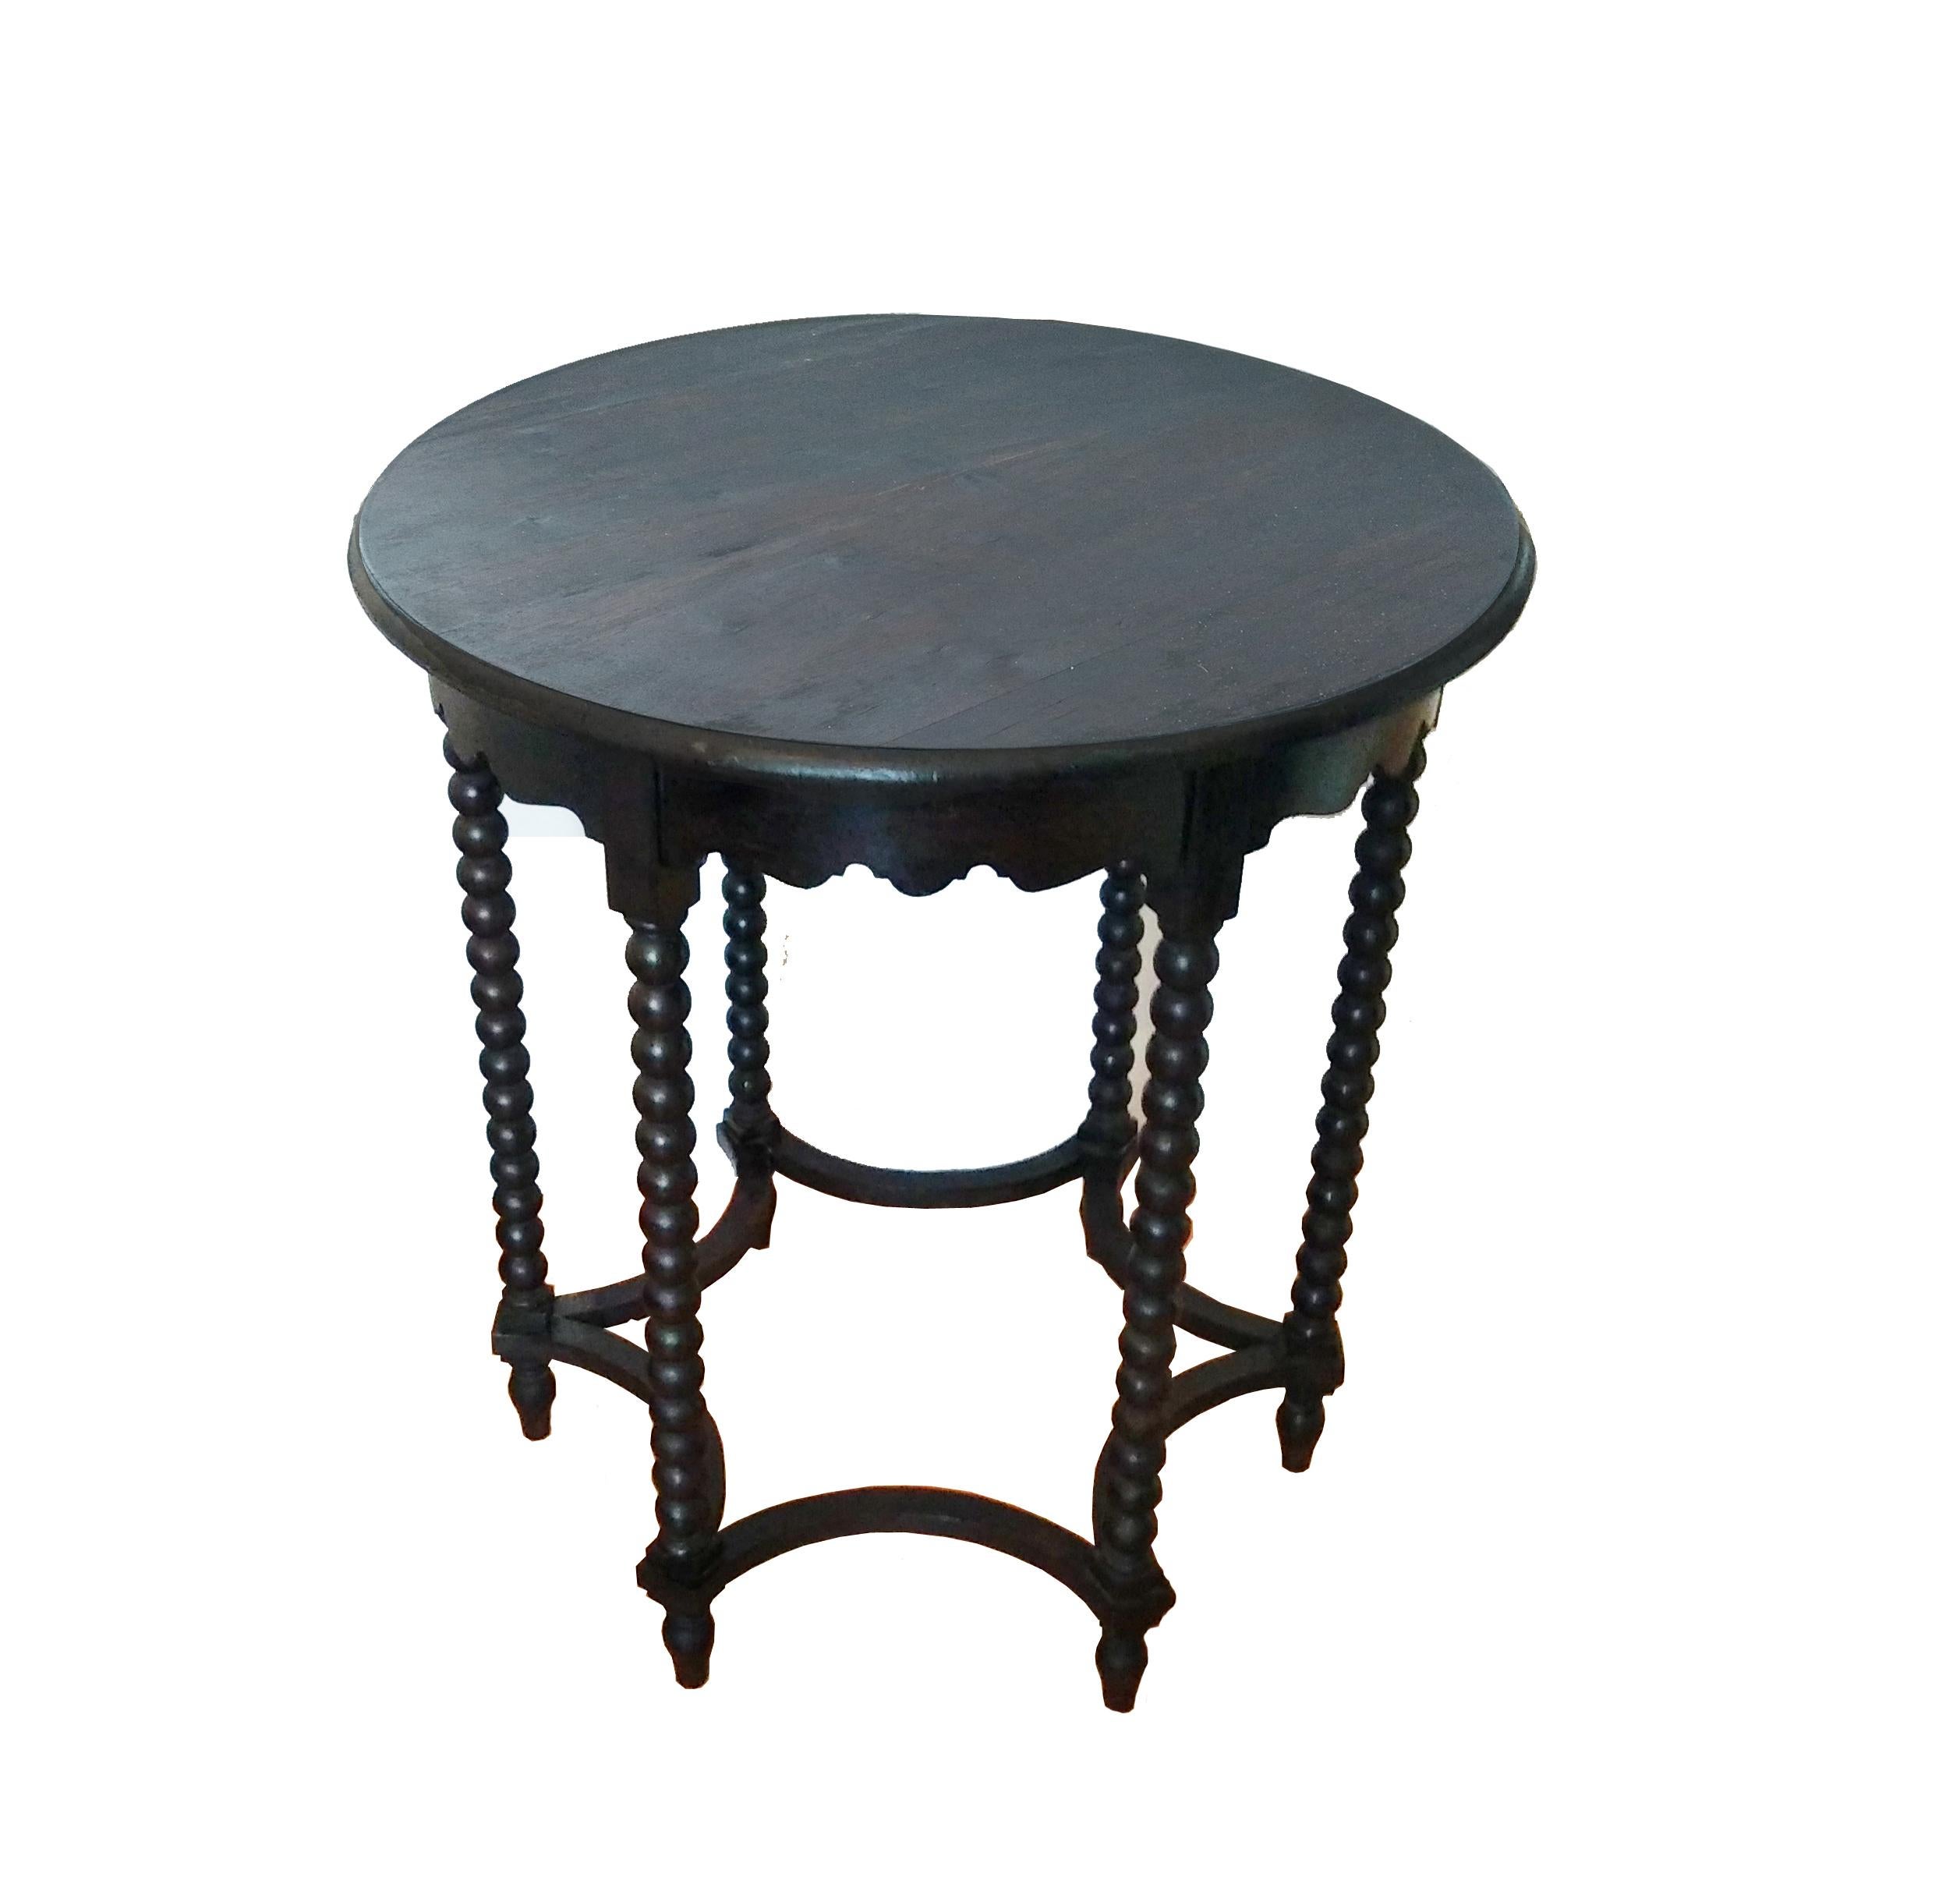 Round antique table of the 19th century. Wood with bobin legs

This table is raised on a base composed of six bobin legs and a optogonal star stretcher, also turned




   